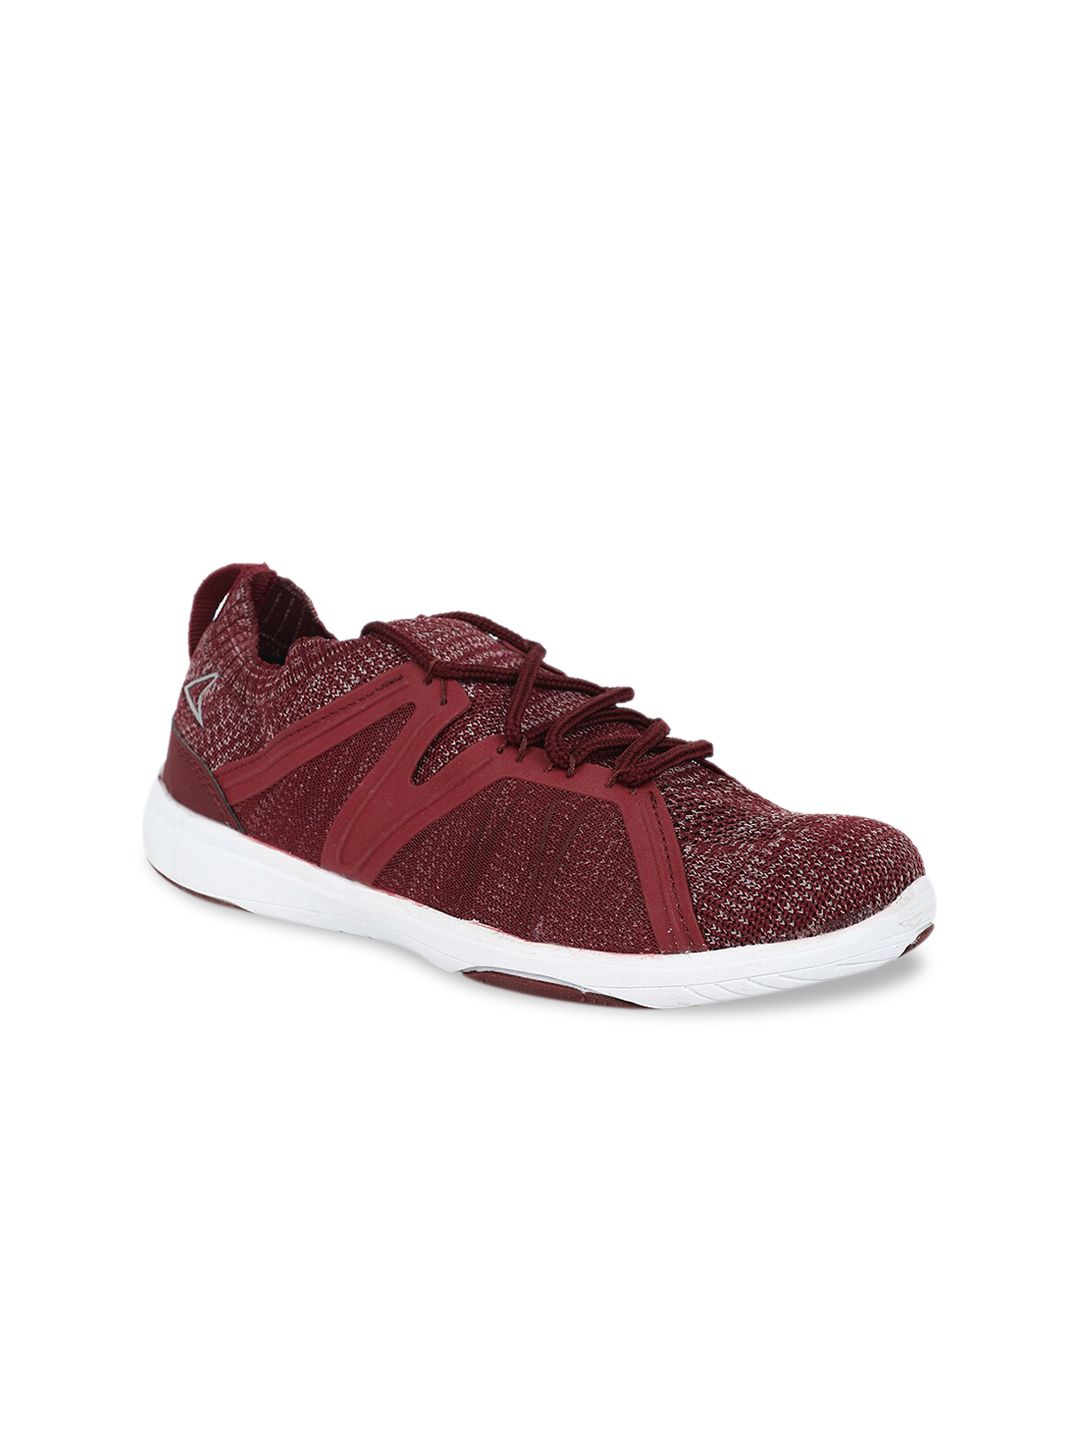 Power Women Maroon Running Sports Shoes Price in India